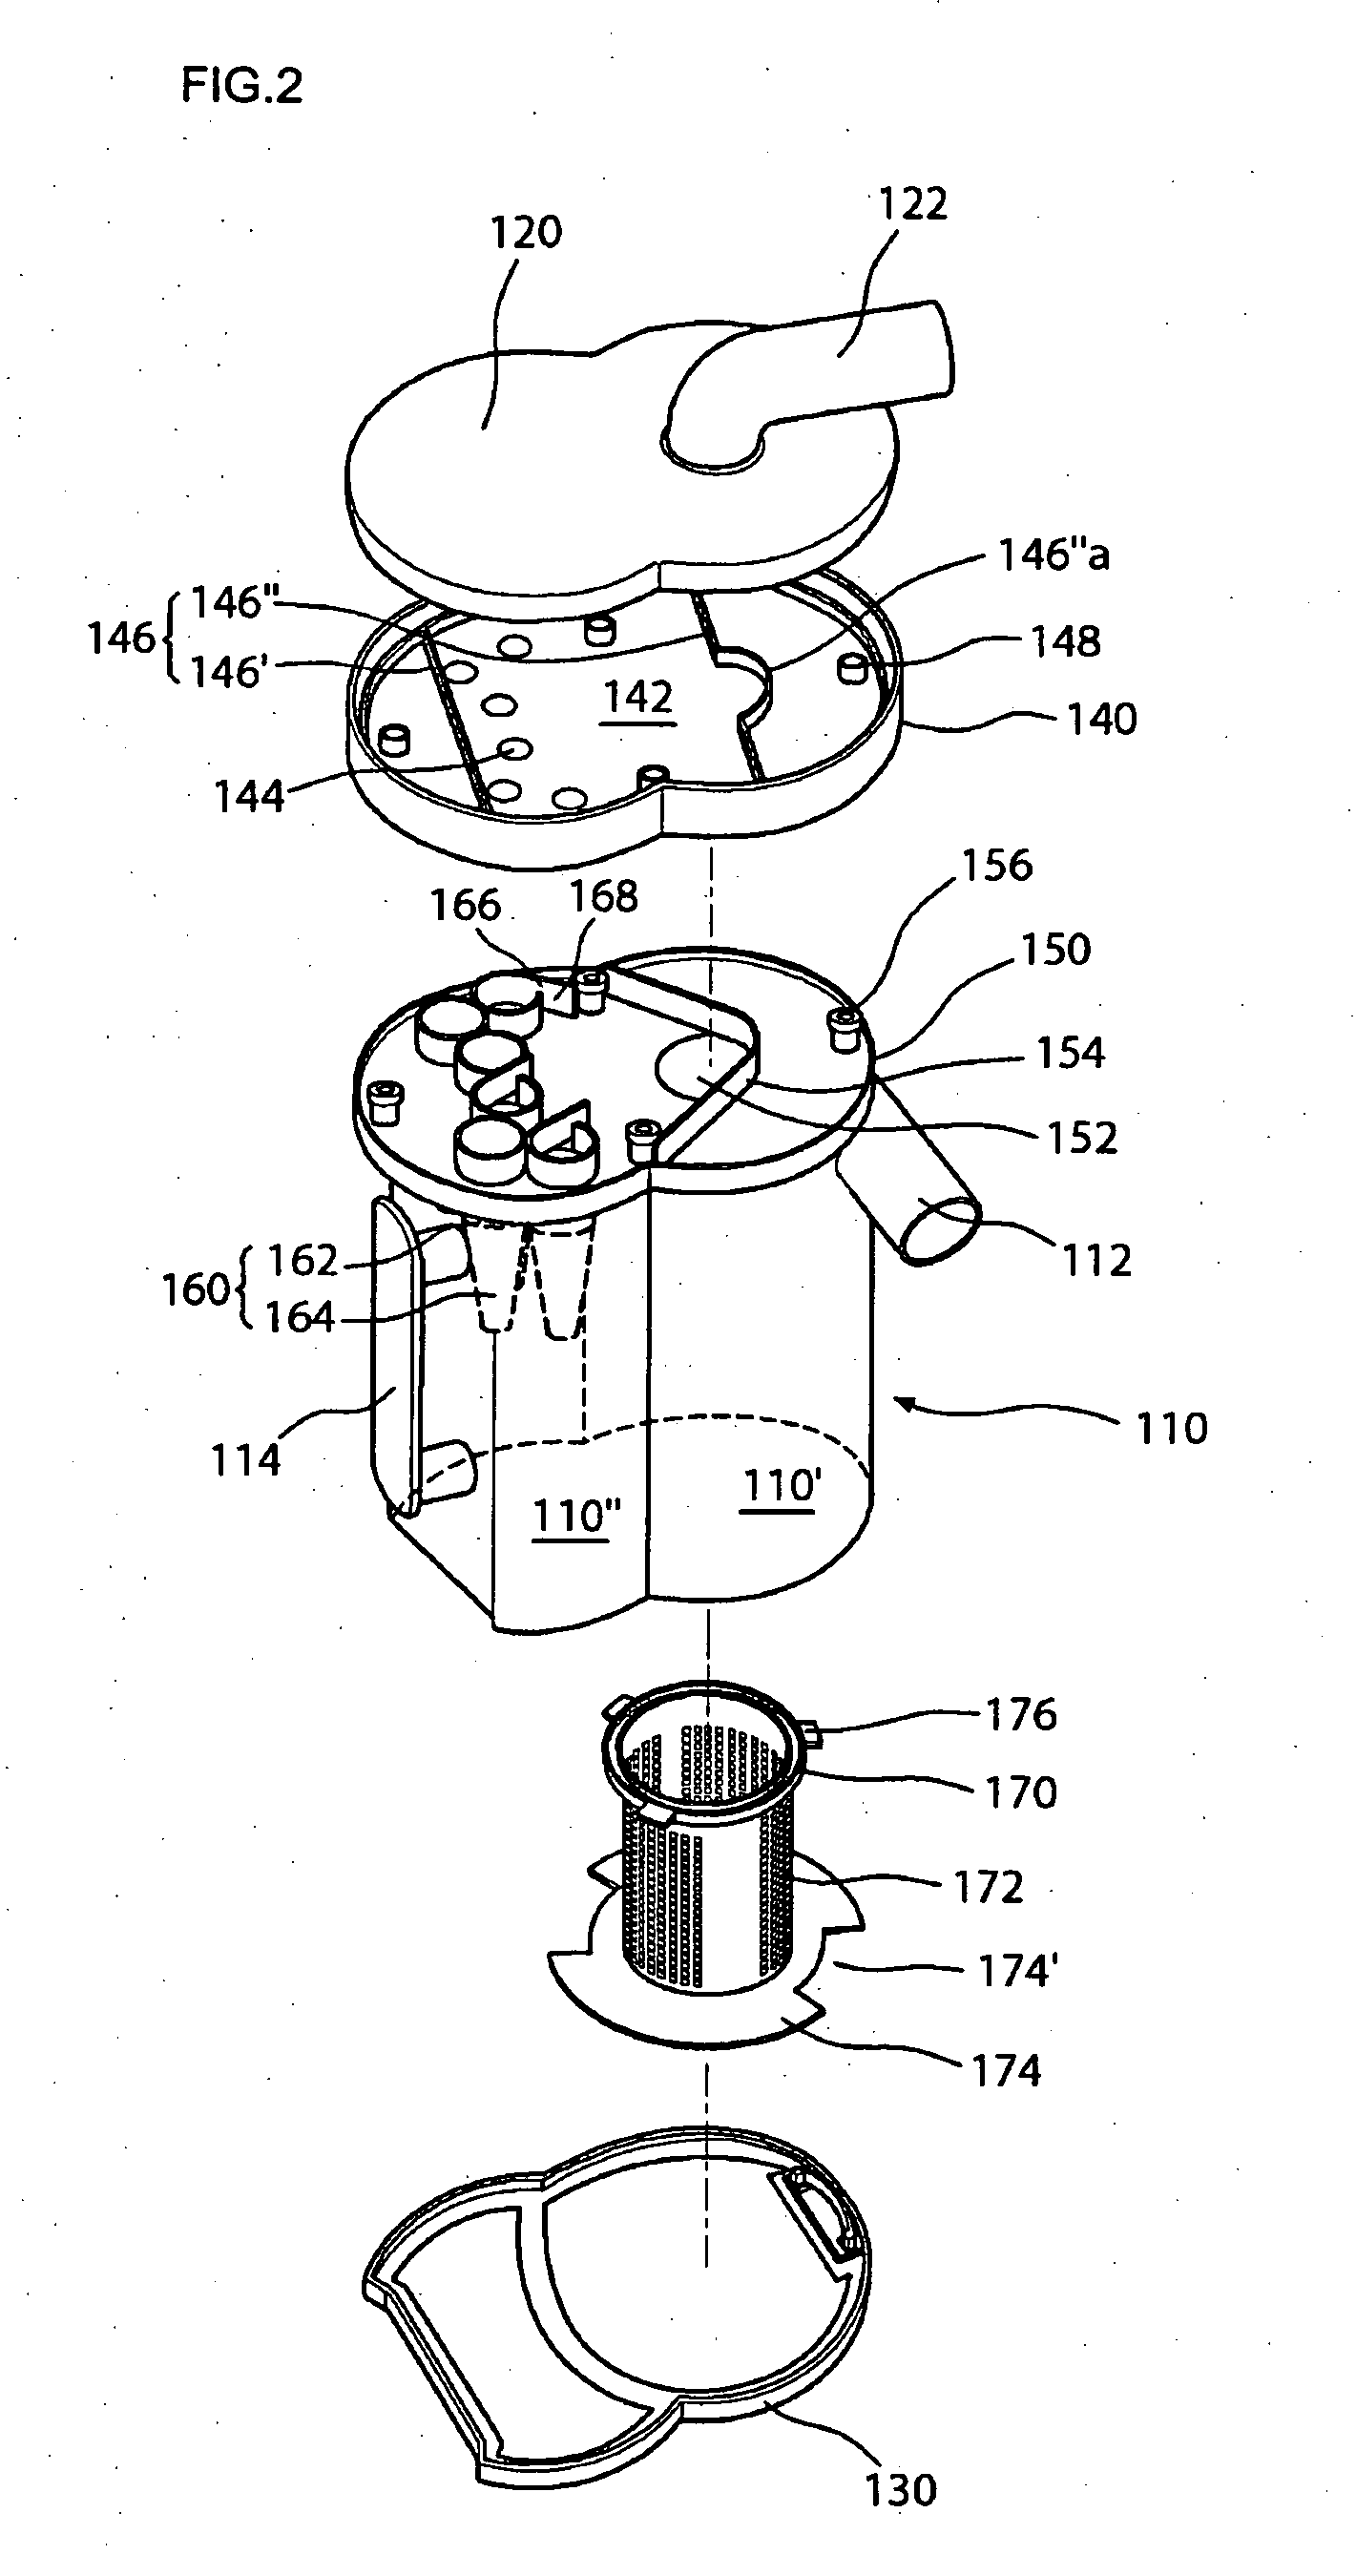 Dust collection assembly of vacuum cleaner